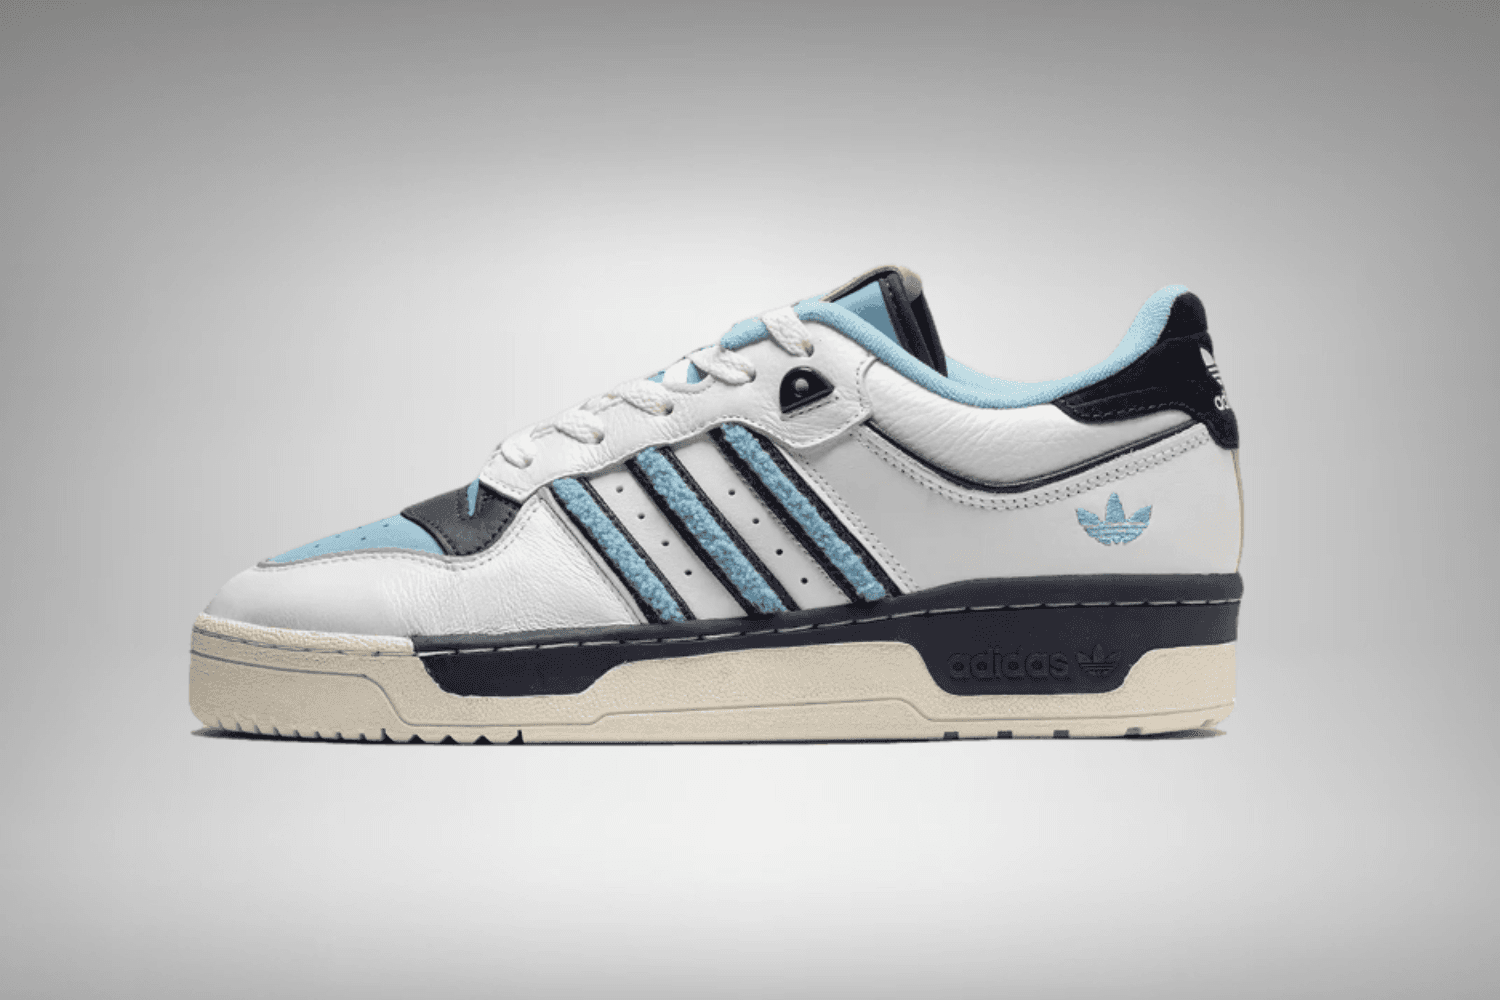 adidas goes vintage with Rivalry Low 86 'Tar Heels'